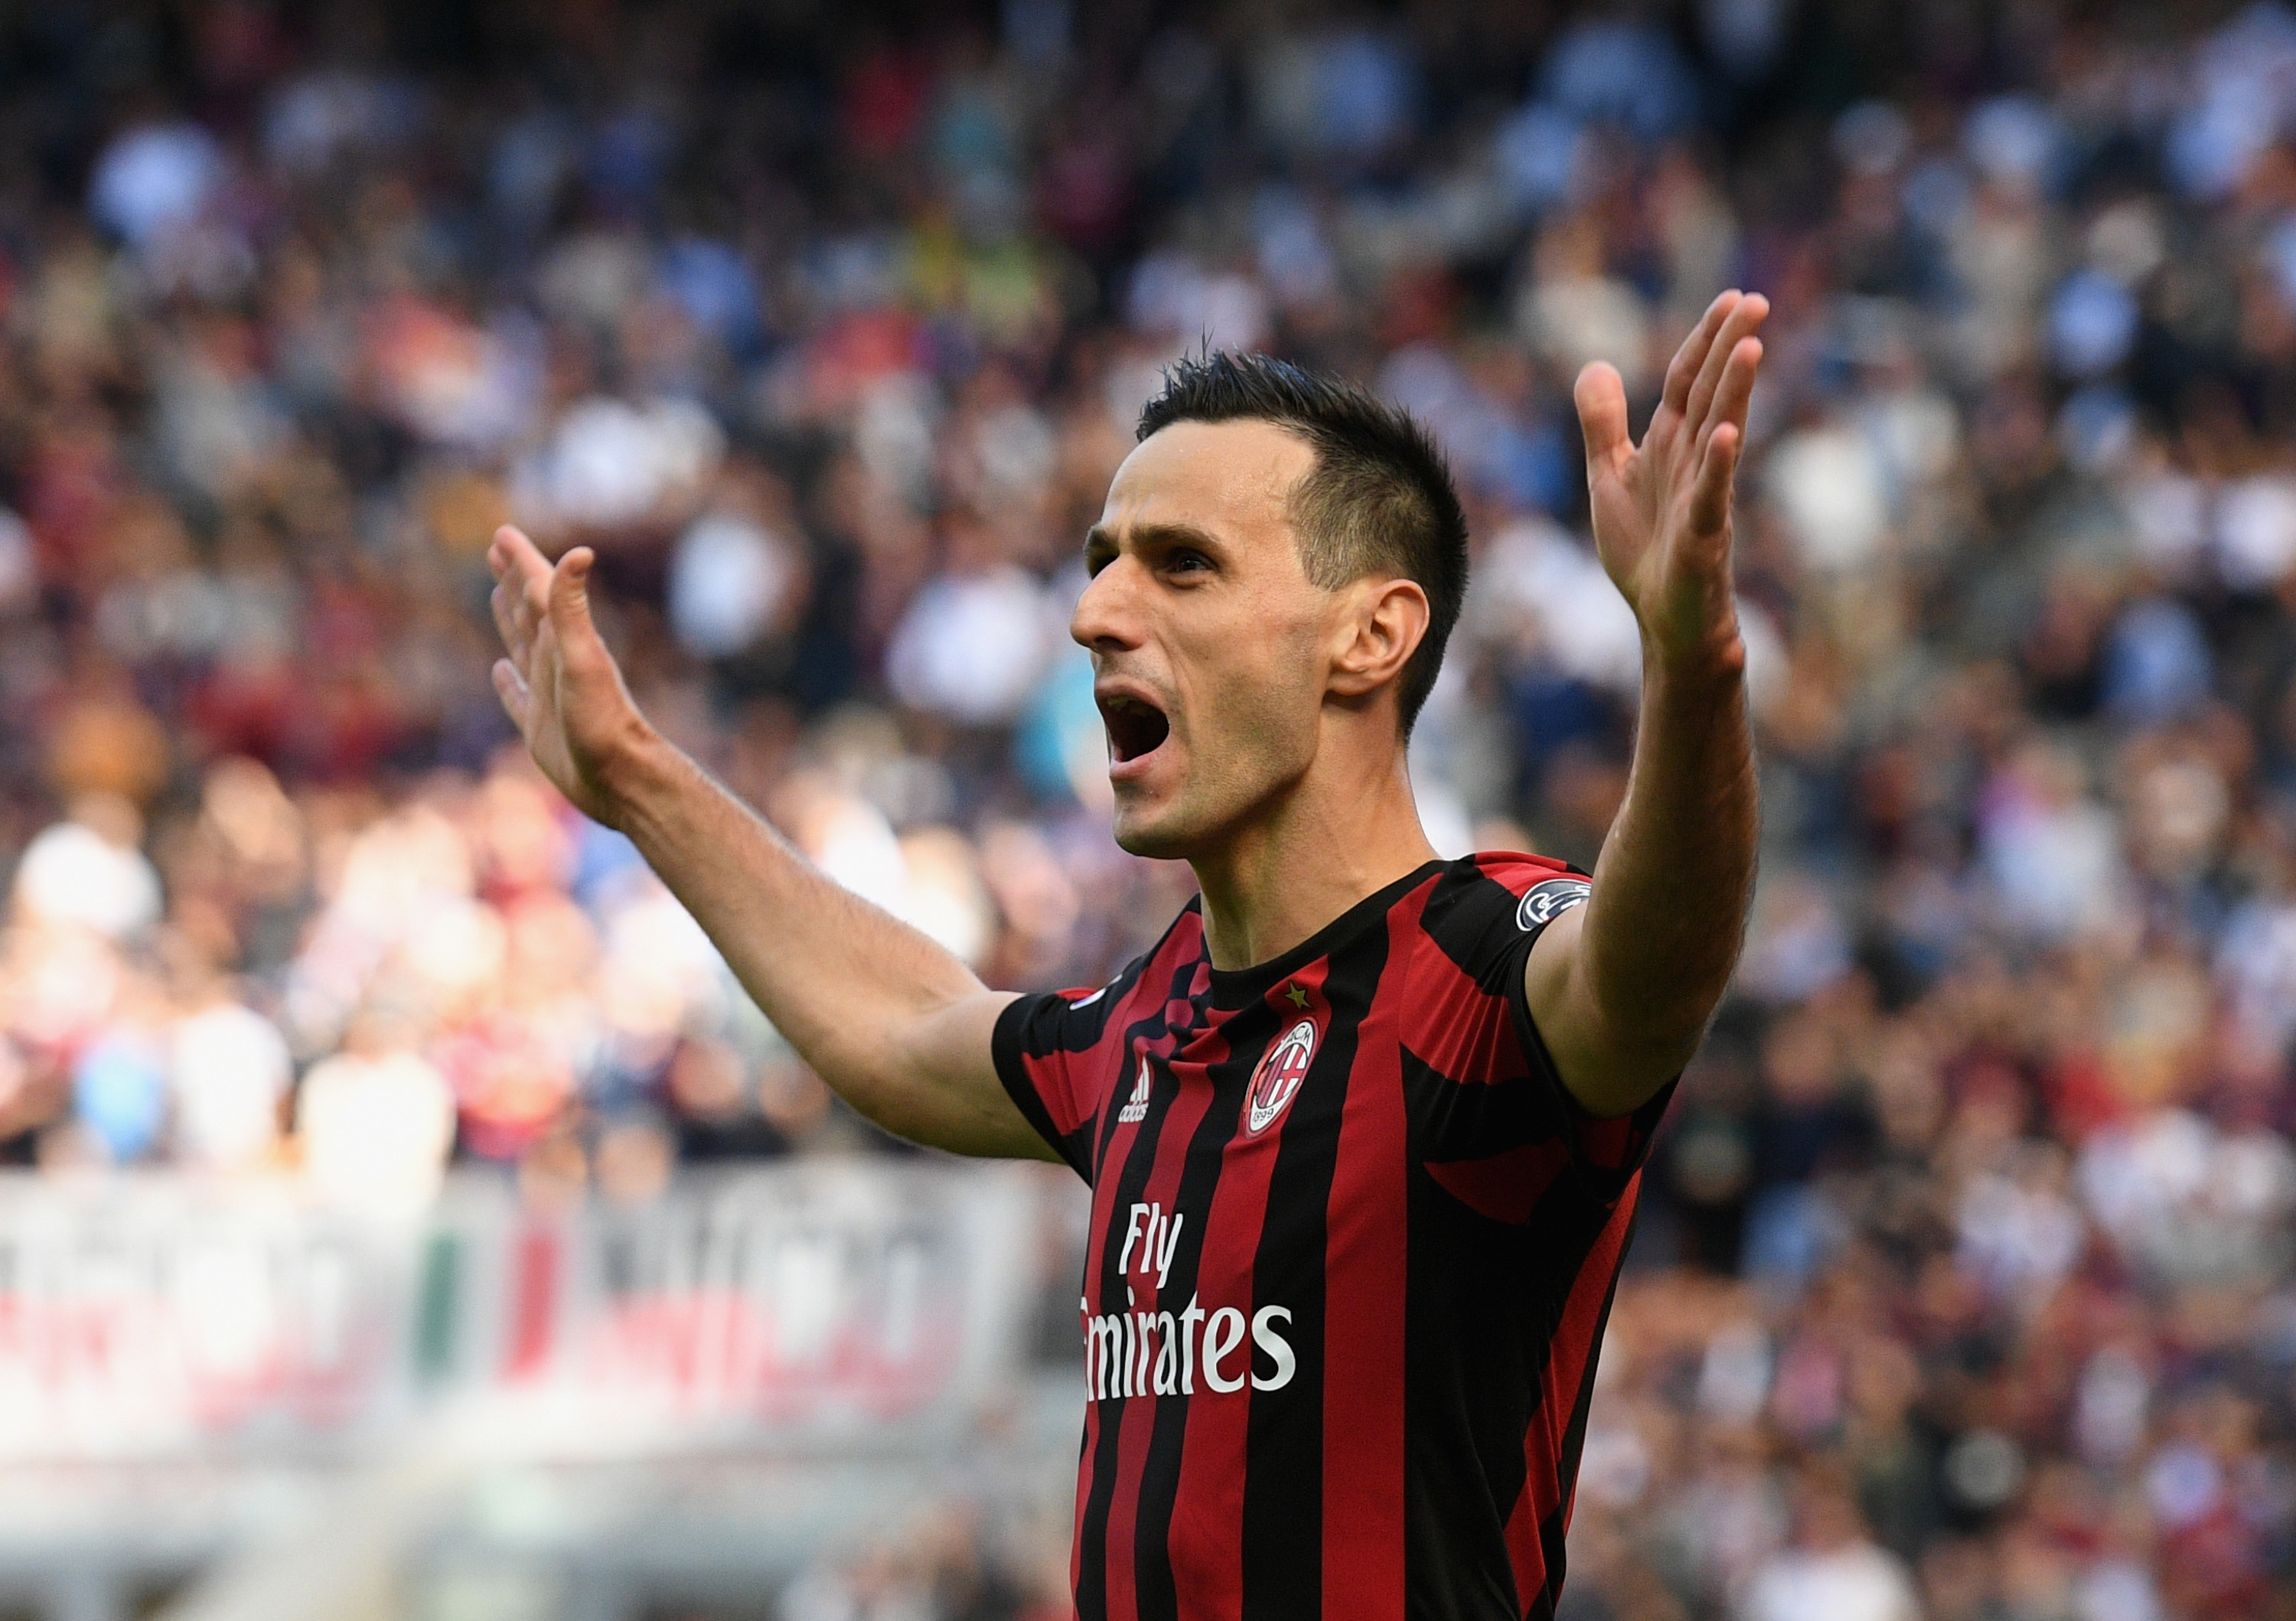 Sky – Kalinic’s recovery: there is optimism for the derby